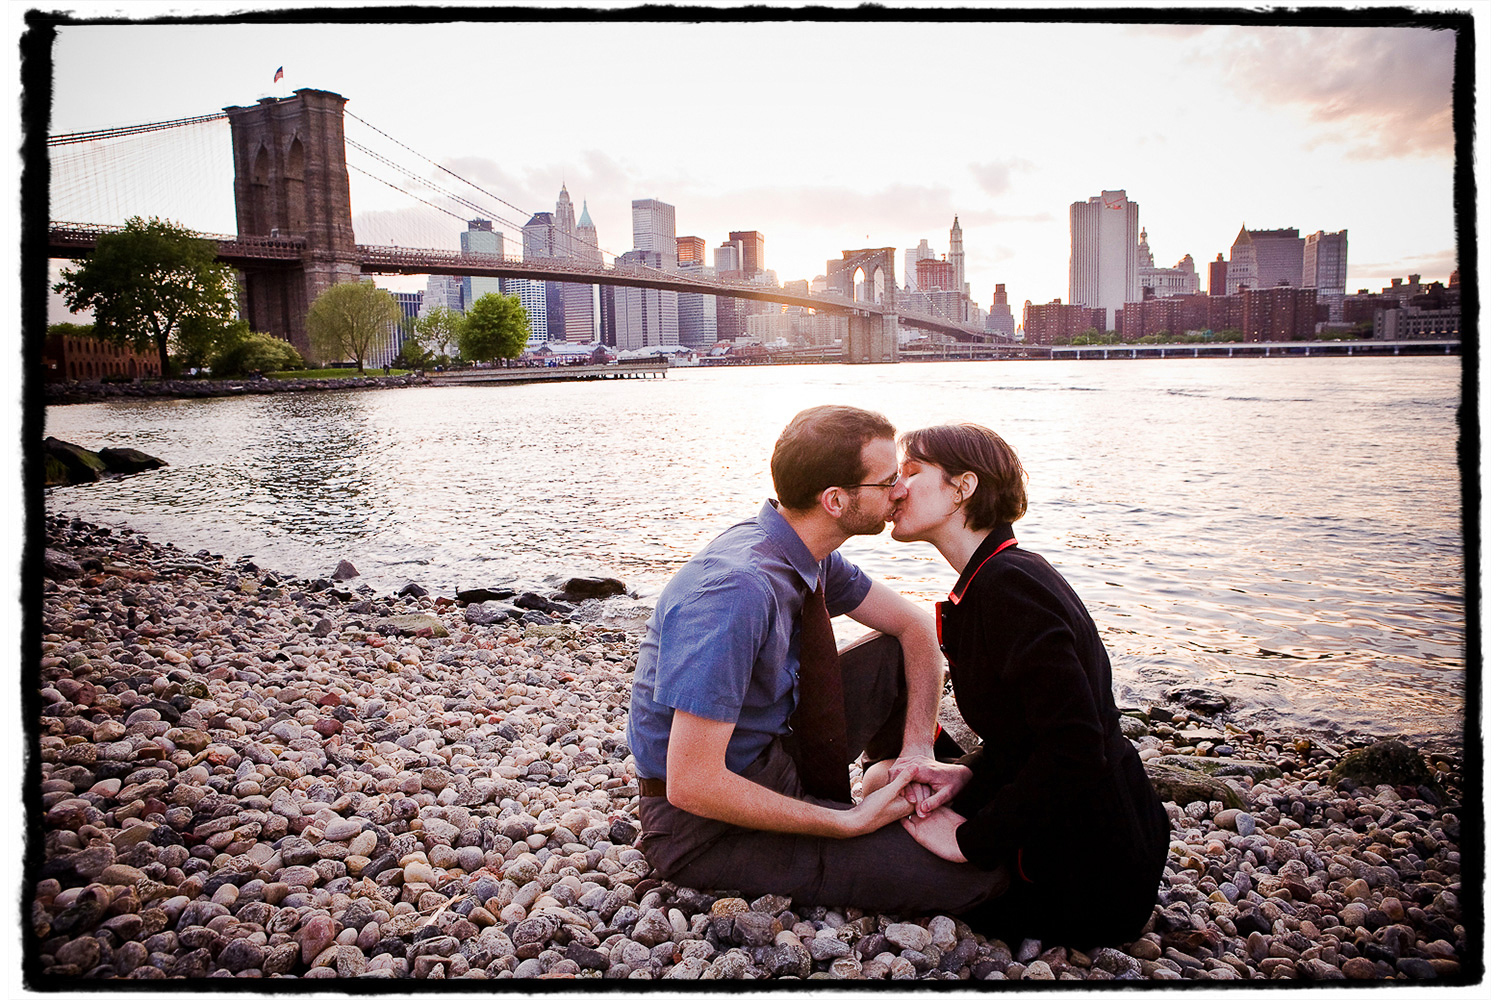 Engagement Portraits: Lindsay & Ben share a kiss on the pebbled beach in DUMBO, Brooklyn.